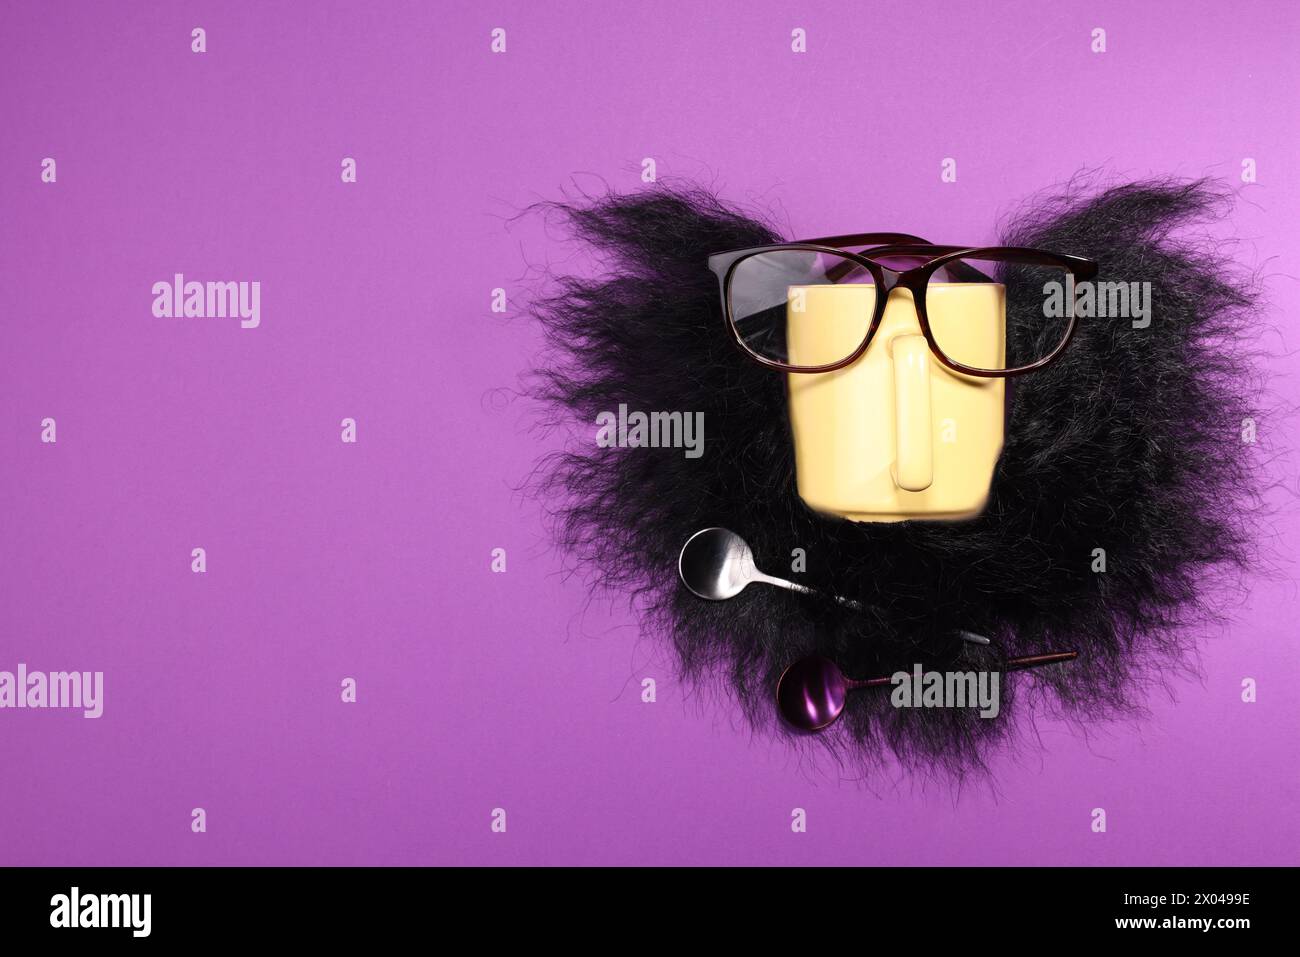 Man's face made of artificial beard, cup and glasses on purple background, top view. Space for text Stock Photo